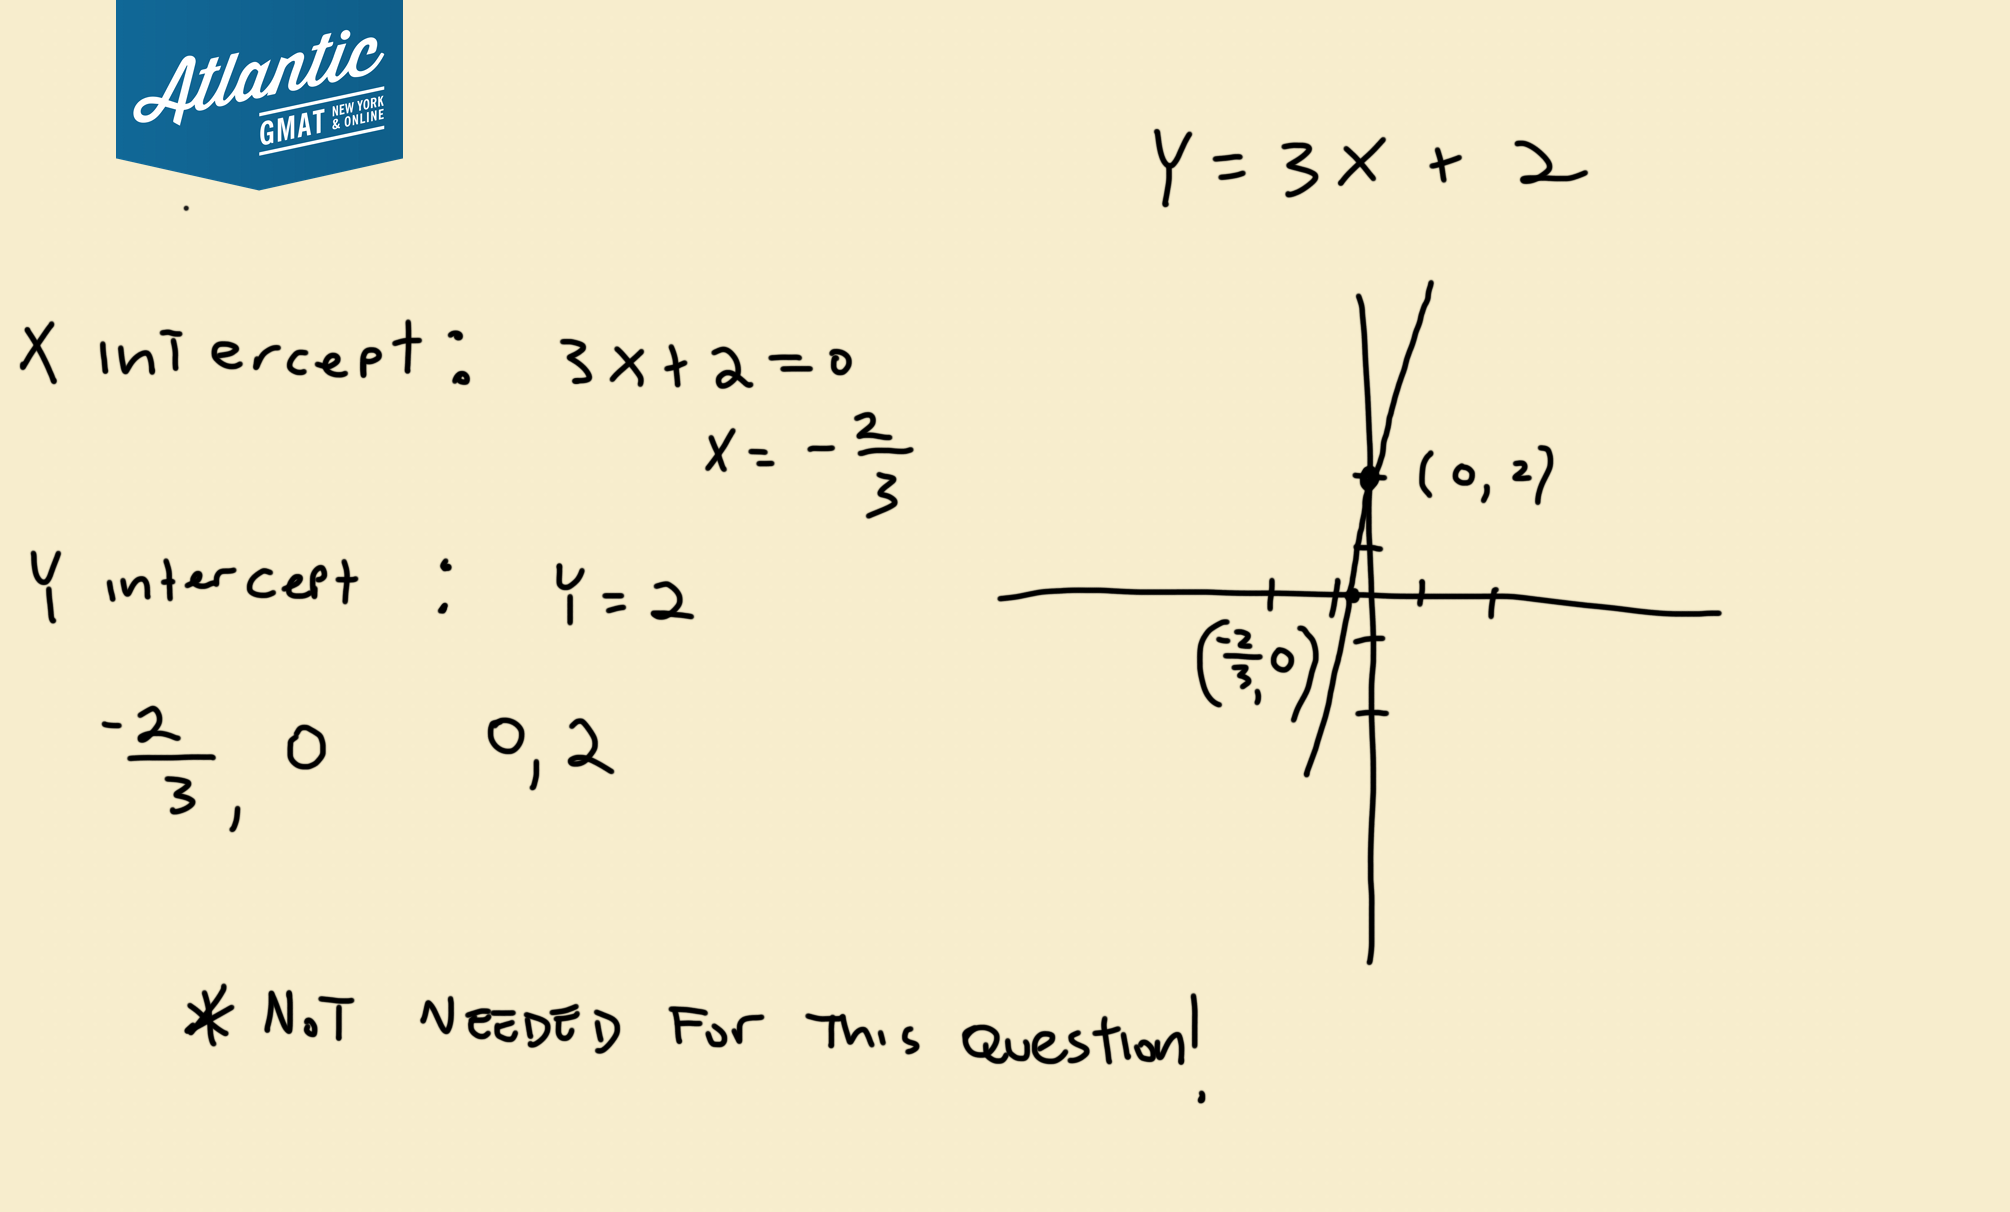 in the xy-plane, does the line with equation y = 3x + 2 contain the point (r,s)? graph